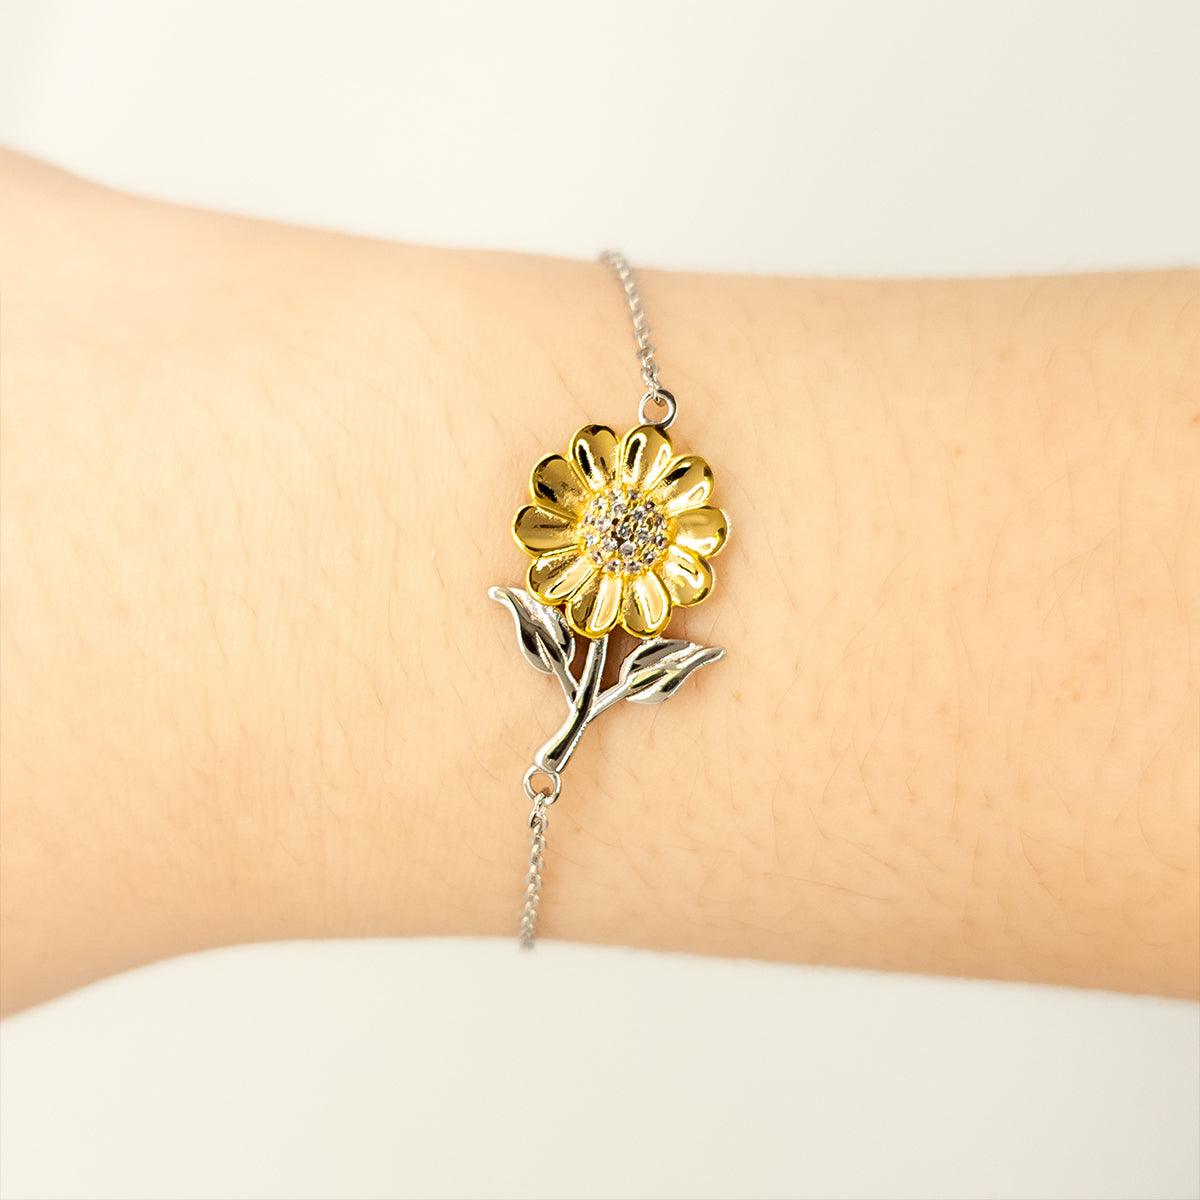 Inspirational Son-In-Law Sunflower Bracelet - Behind you, all your Memories, Before you, all your Dreams - Birthday, Christmas Holiday Gifts - Mallard Moon Gift Shop